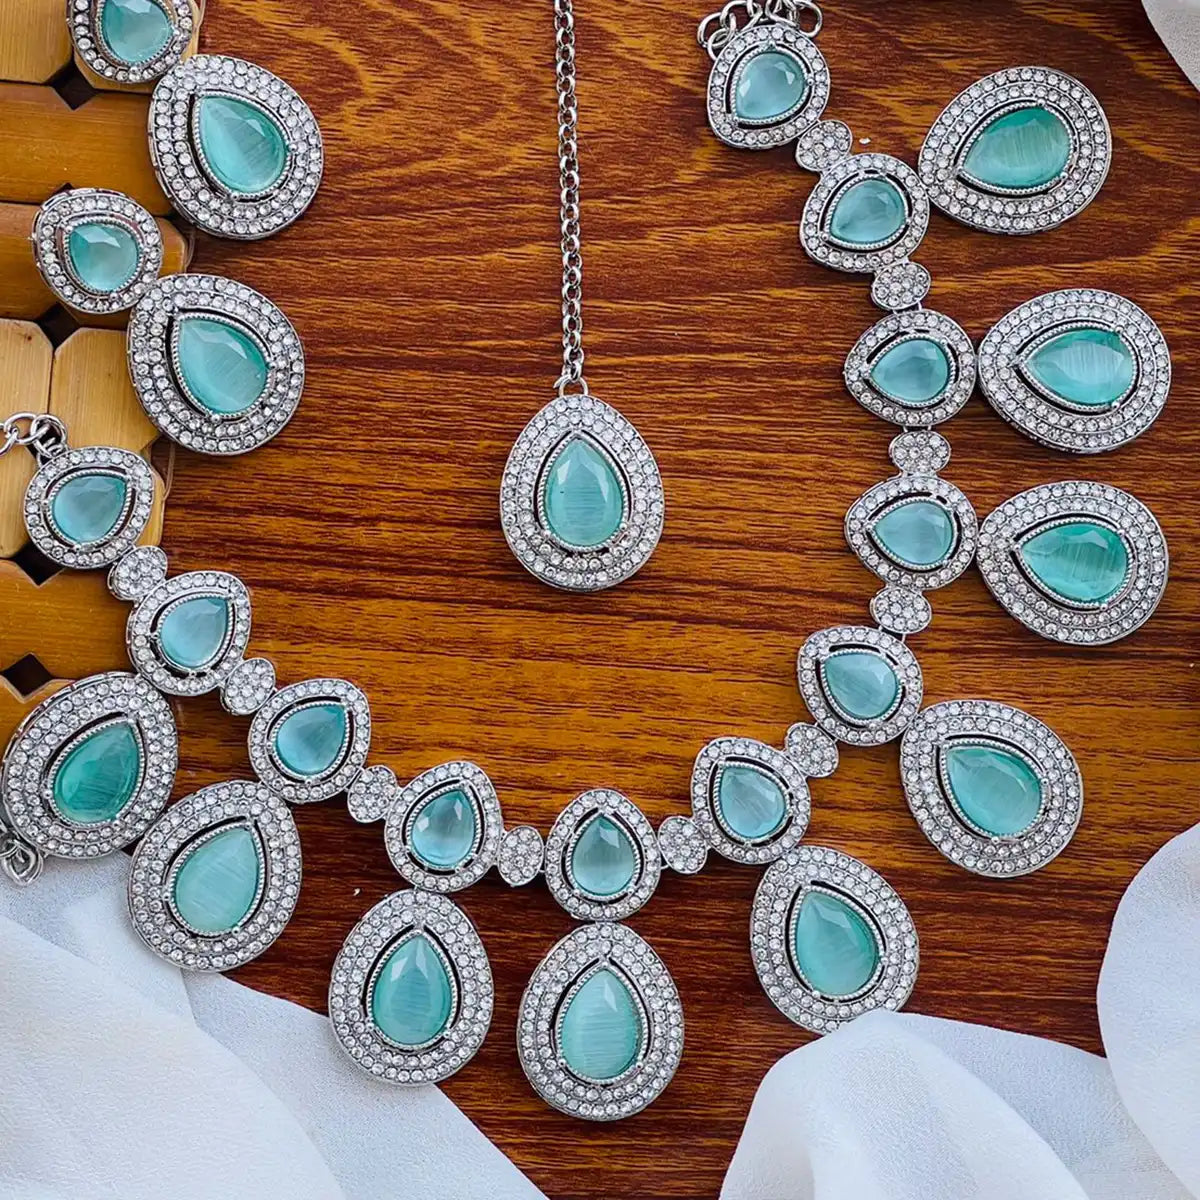 long chain necklace with pendant njc-001 turquoise